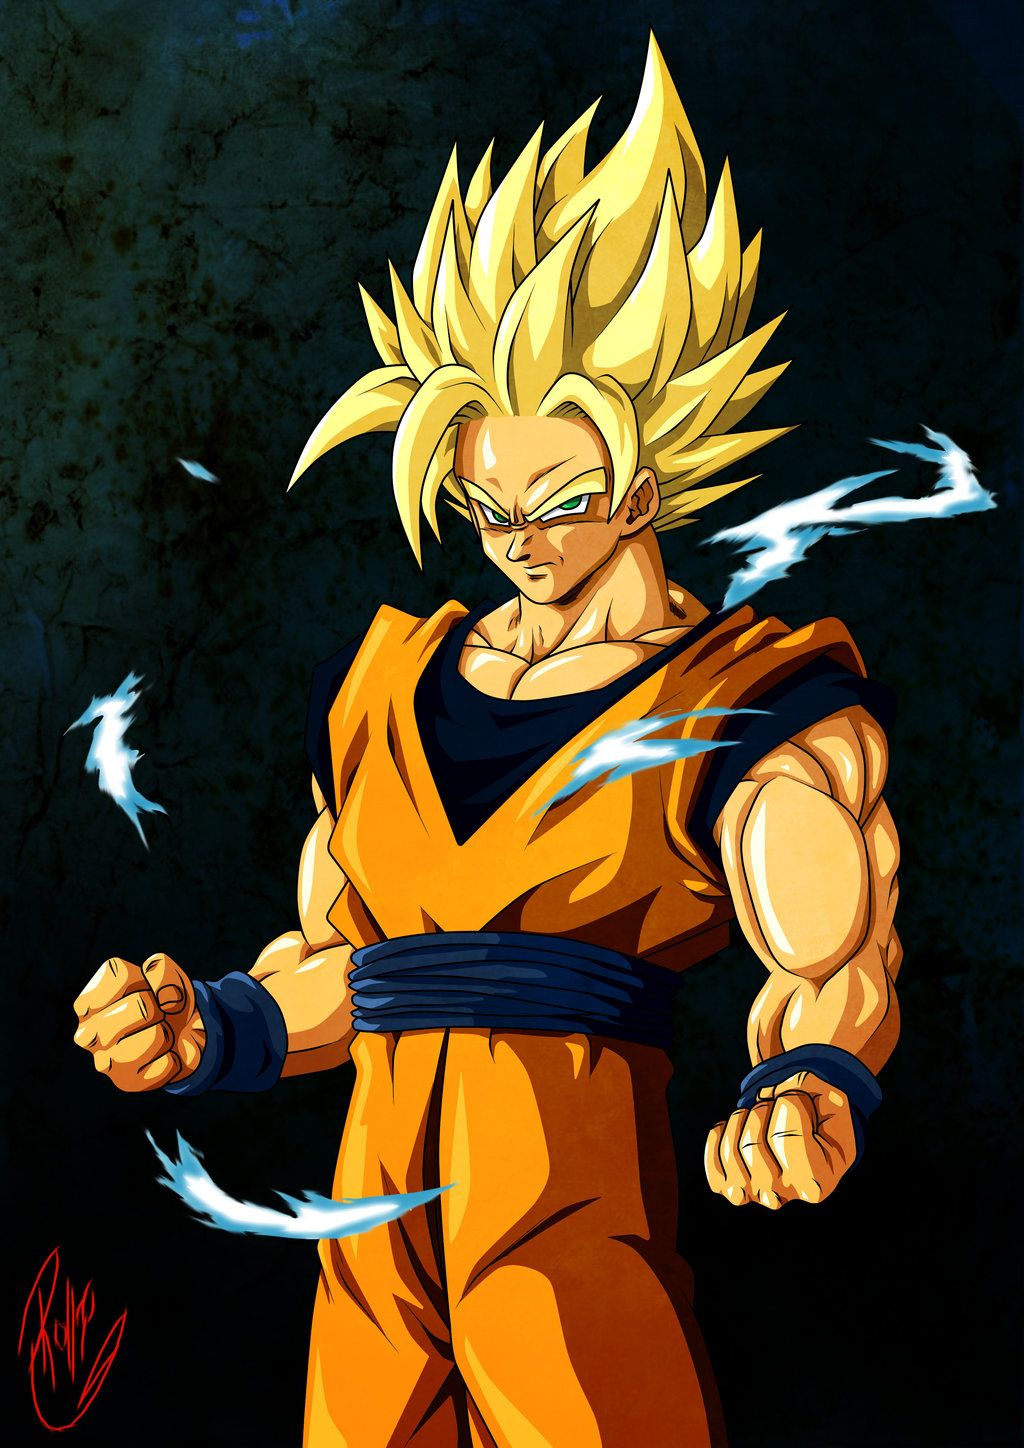 Tons of awesome Goku Super Saiyan 2 wallpapers to download for free. 